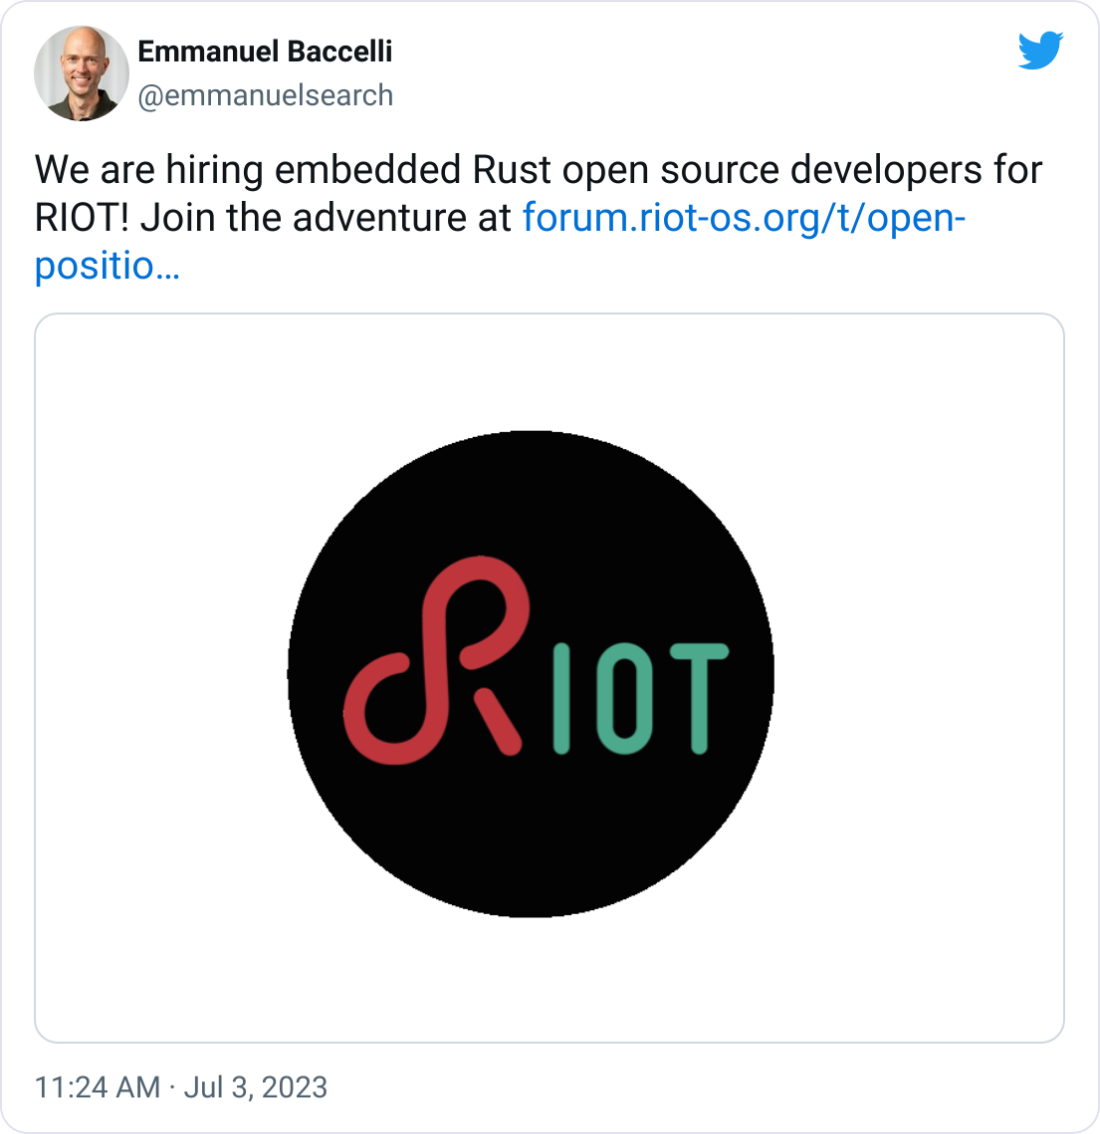 Emmanuel Baccelli @emmanuelsearch We are hiring embedded Rust open source developers for RIOT! Join the adventure at https://forum.riot-os.org/t/open-positions-on-embedded-rust-dev-for-riot/3959